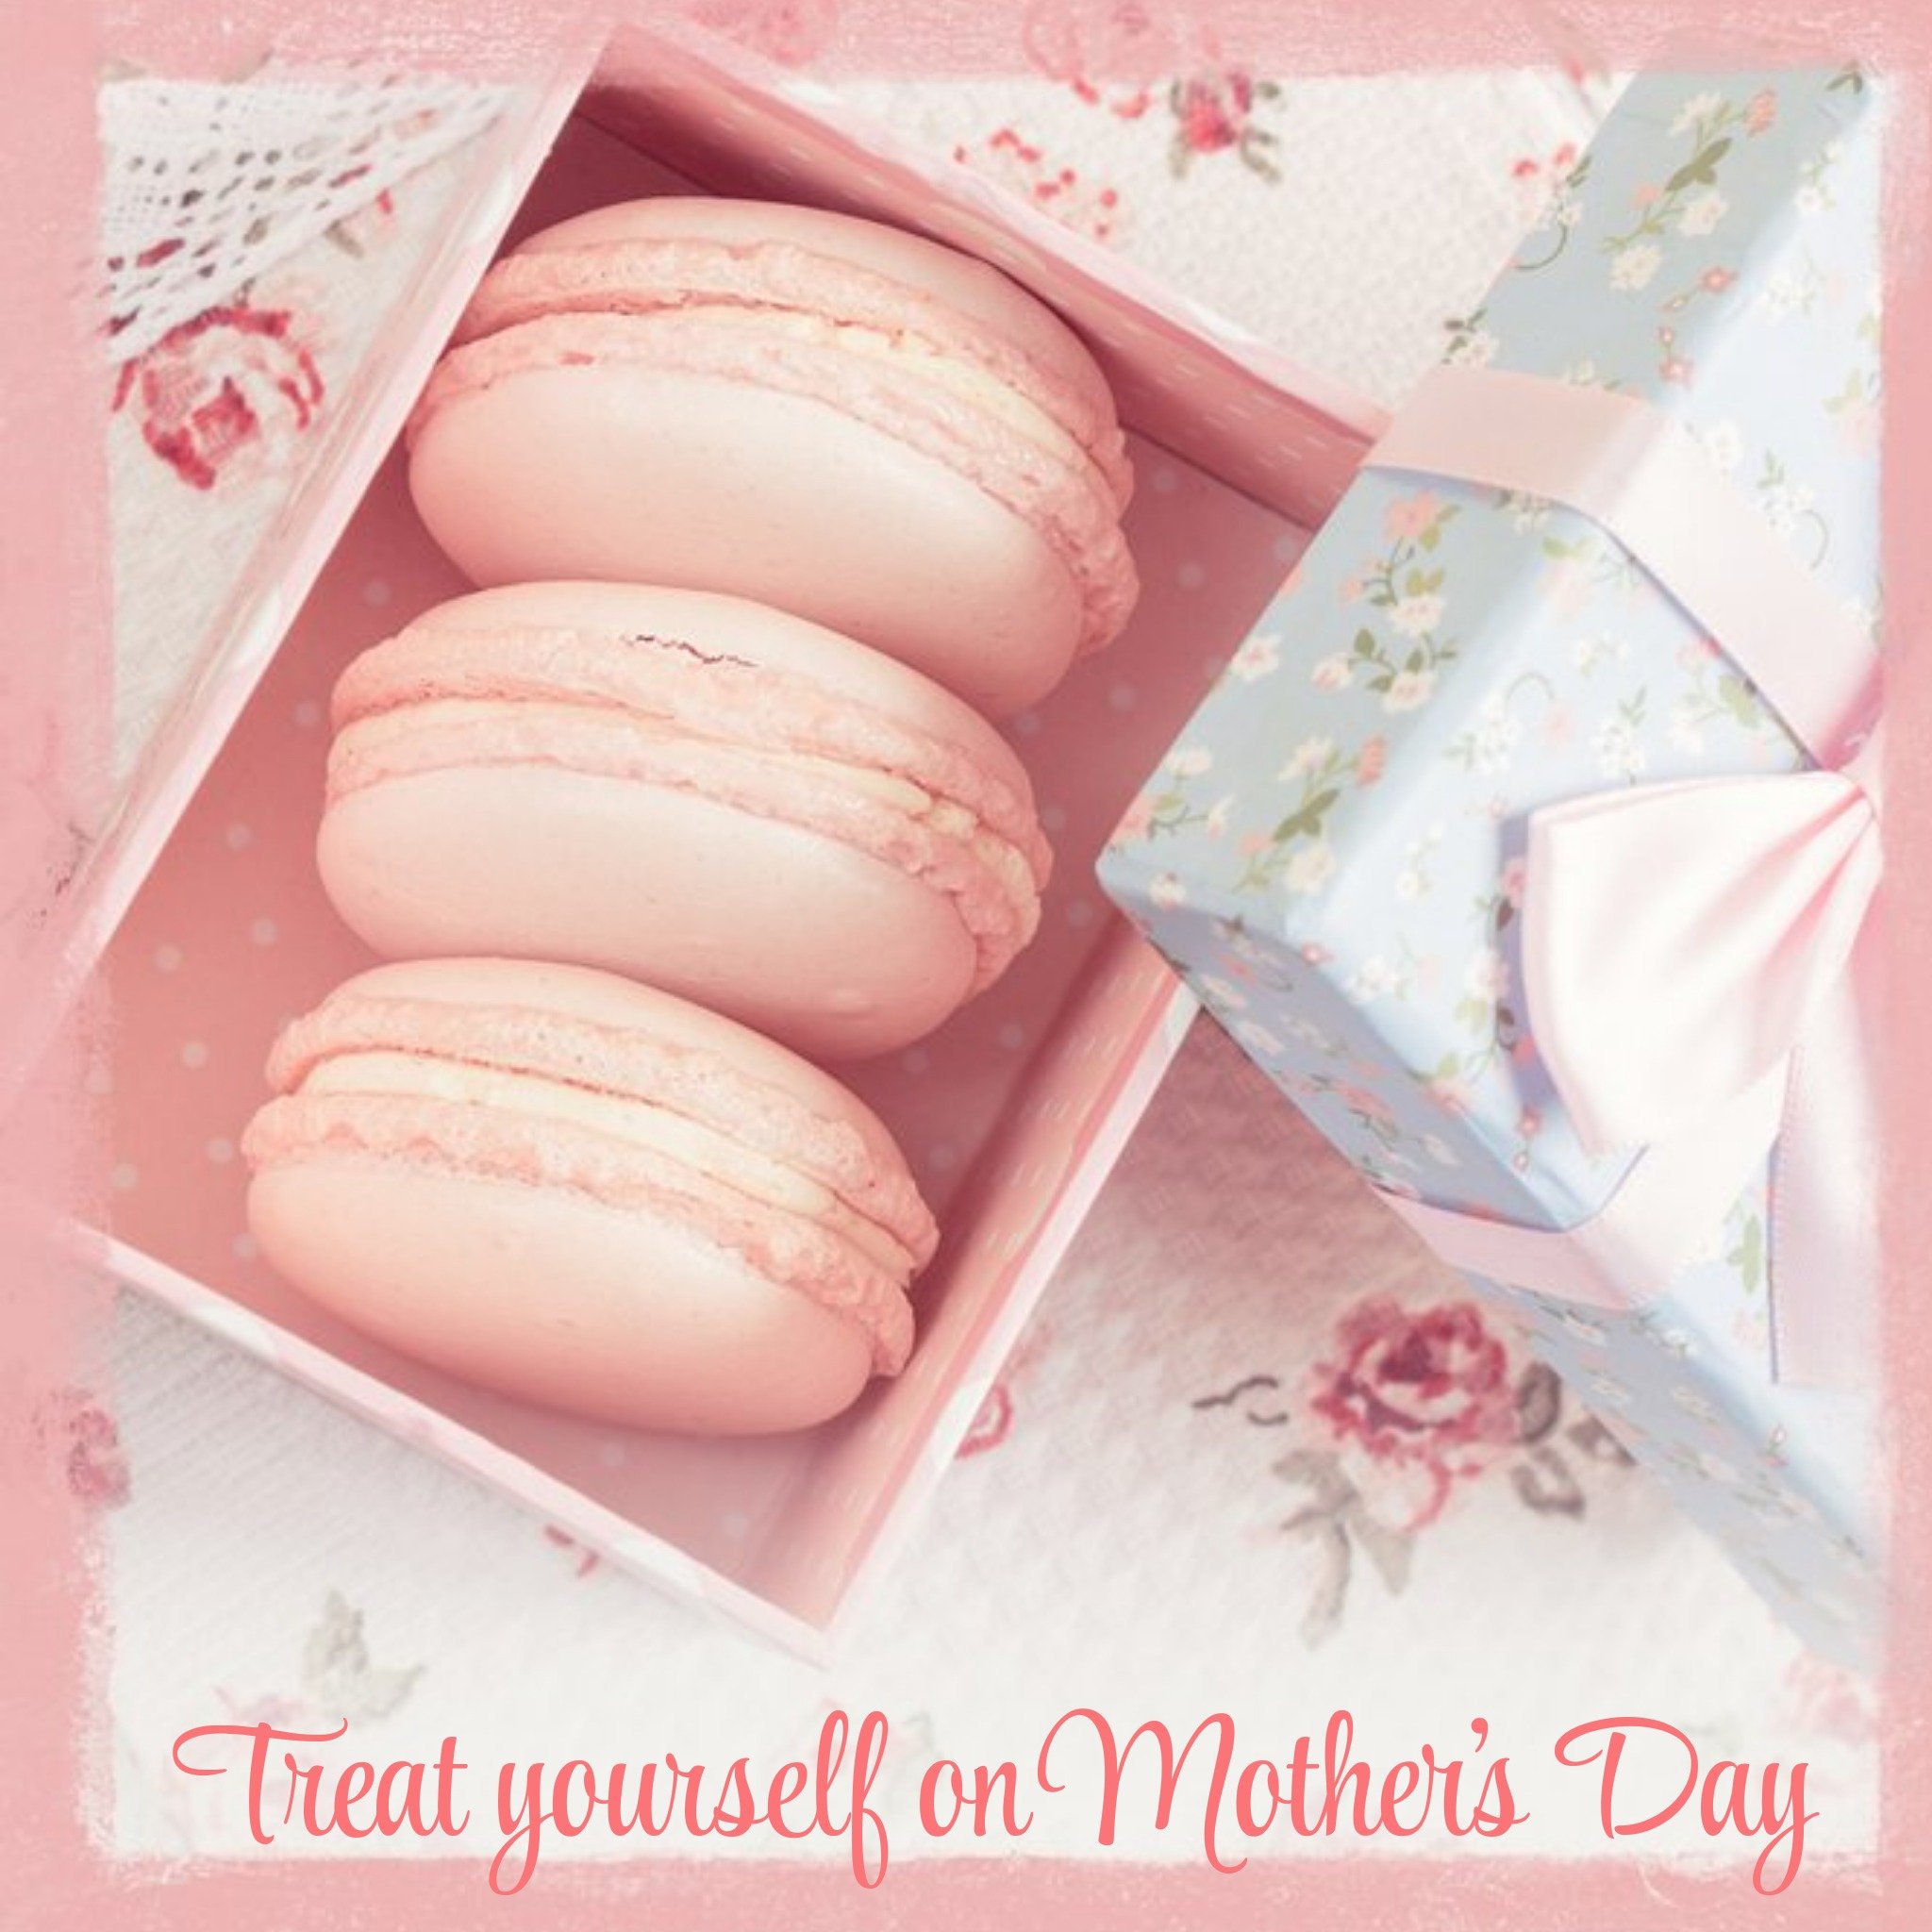 Moonpig Pink Macarons Treat Yourself On Mother's Day Card, Large